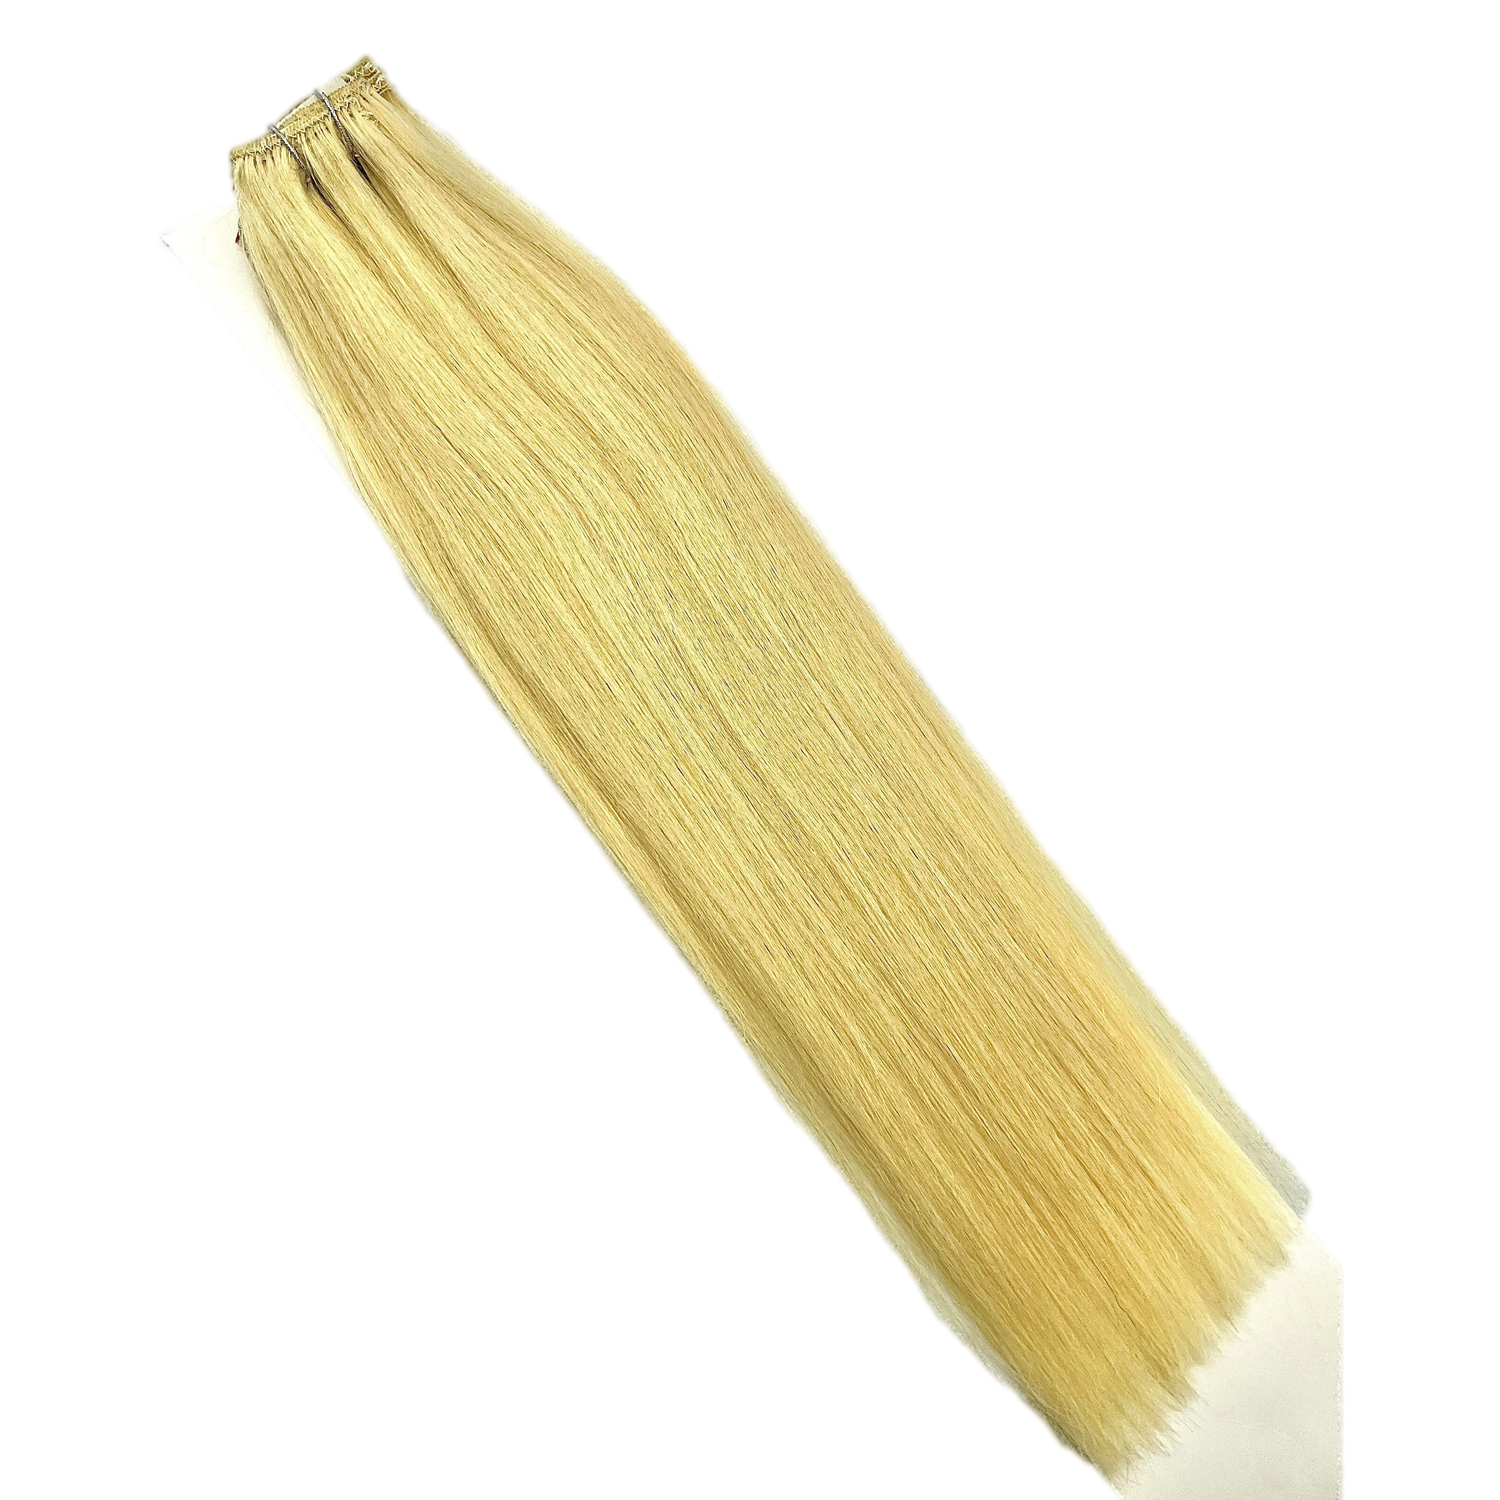 VIP Clip Extensions / Silky Straight - 18" (140 g ) ClipeX System - VIP Extensions